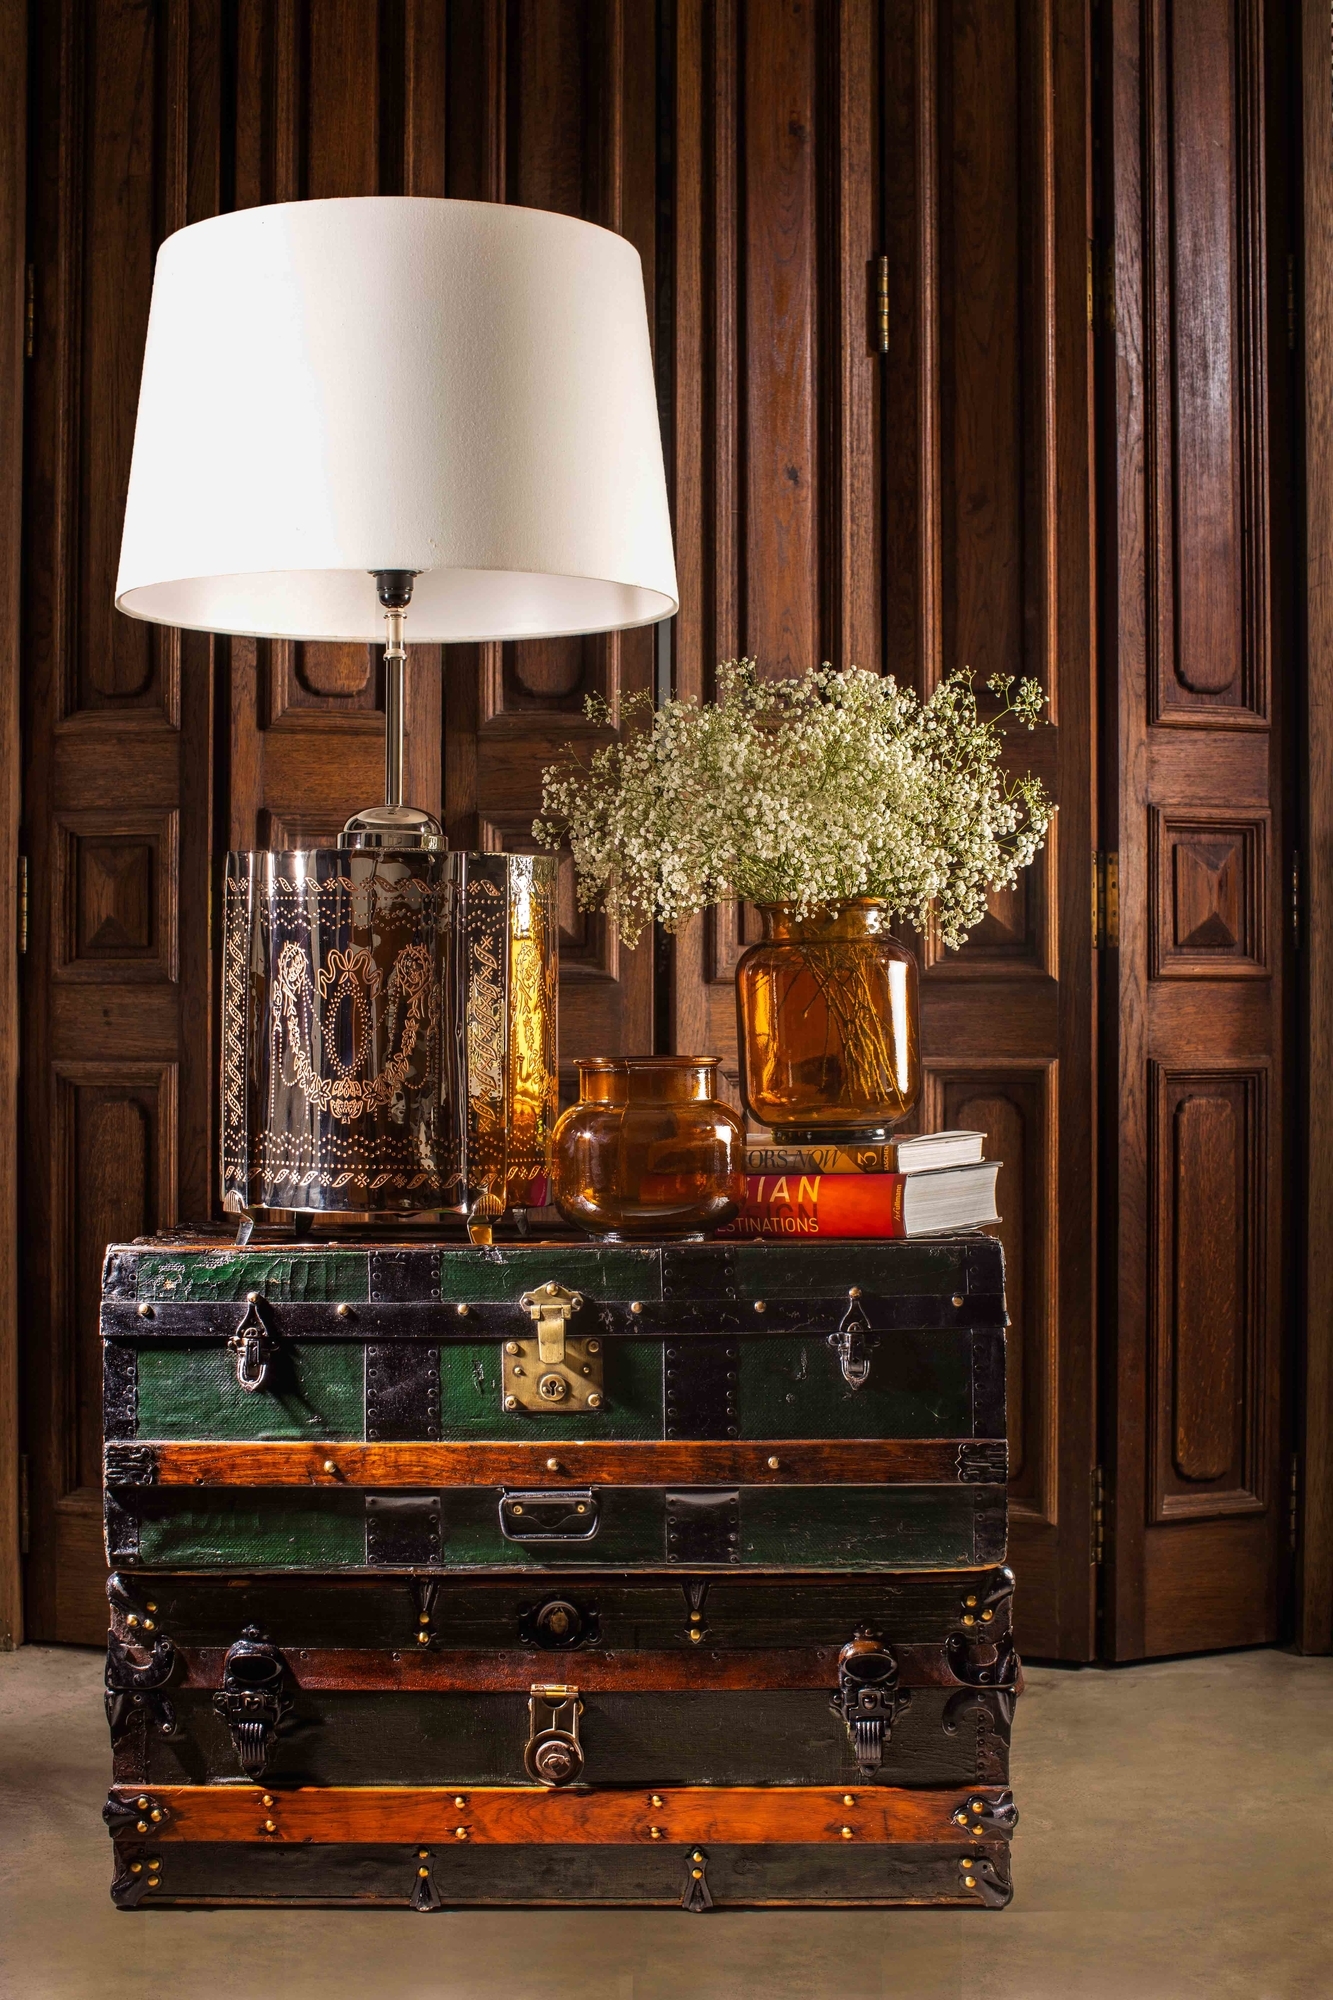 Beyond Designs Launches Antique Trunks - Architect and Interiors India